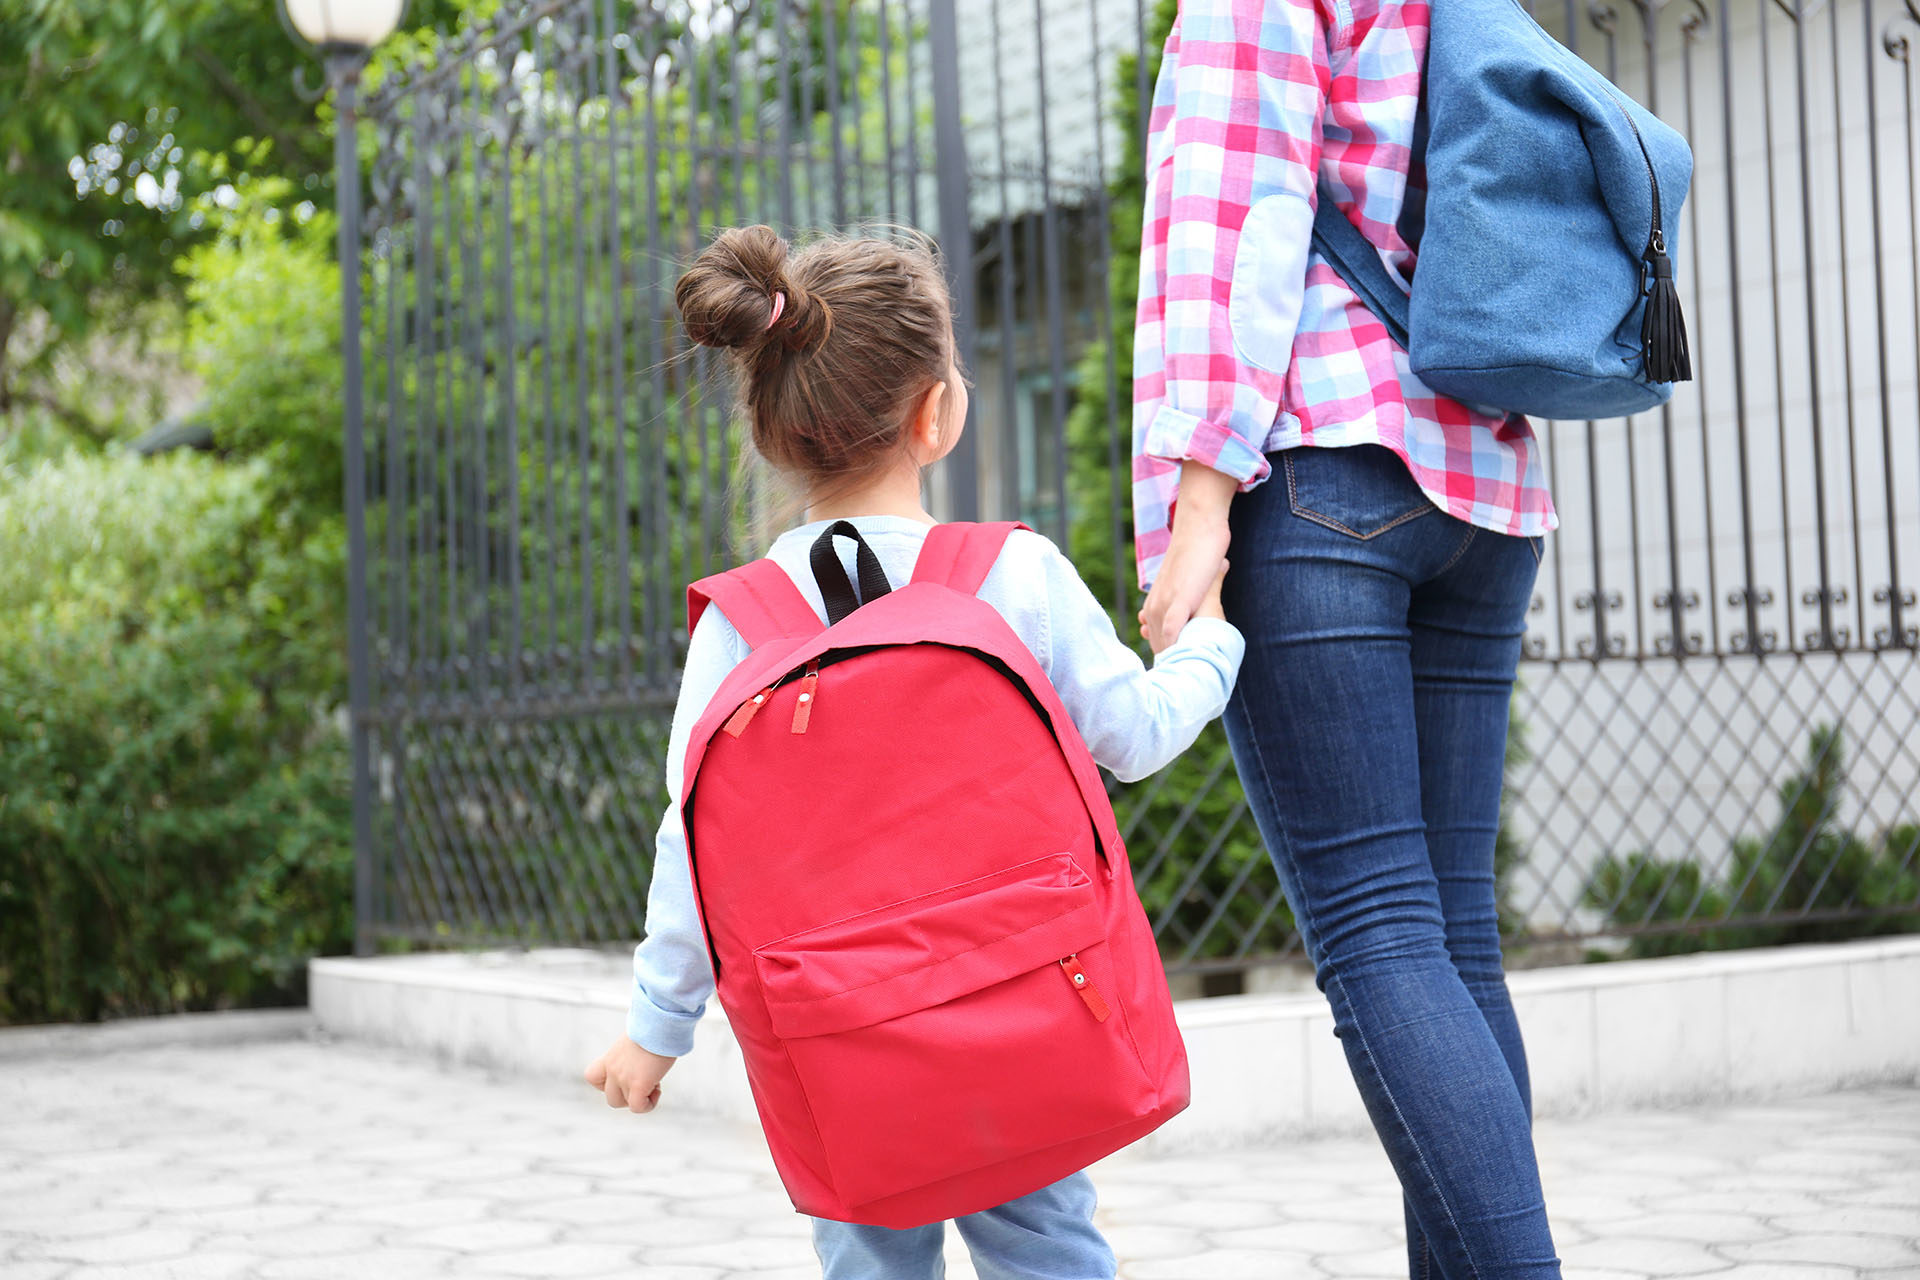 Find out what help your family may be entitled to with back to school costs